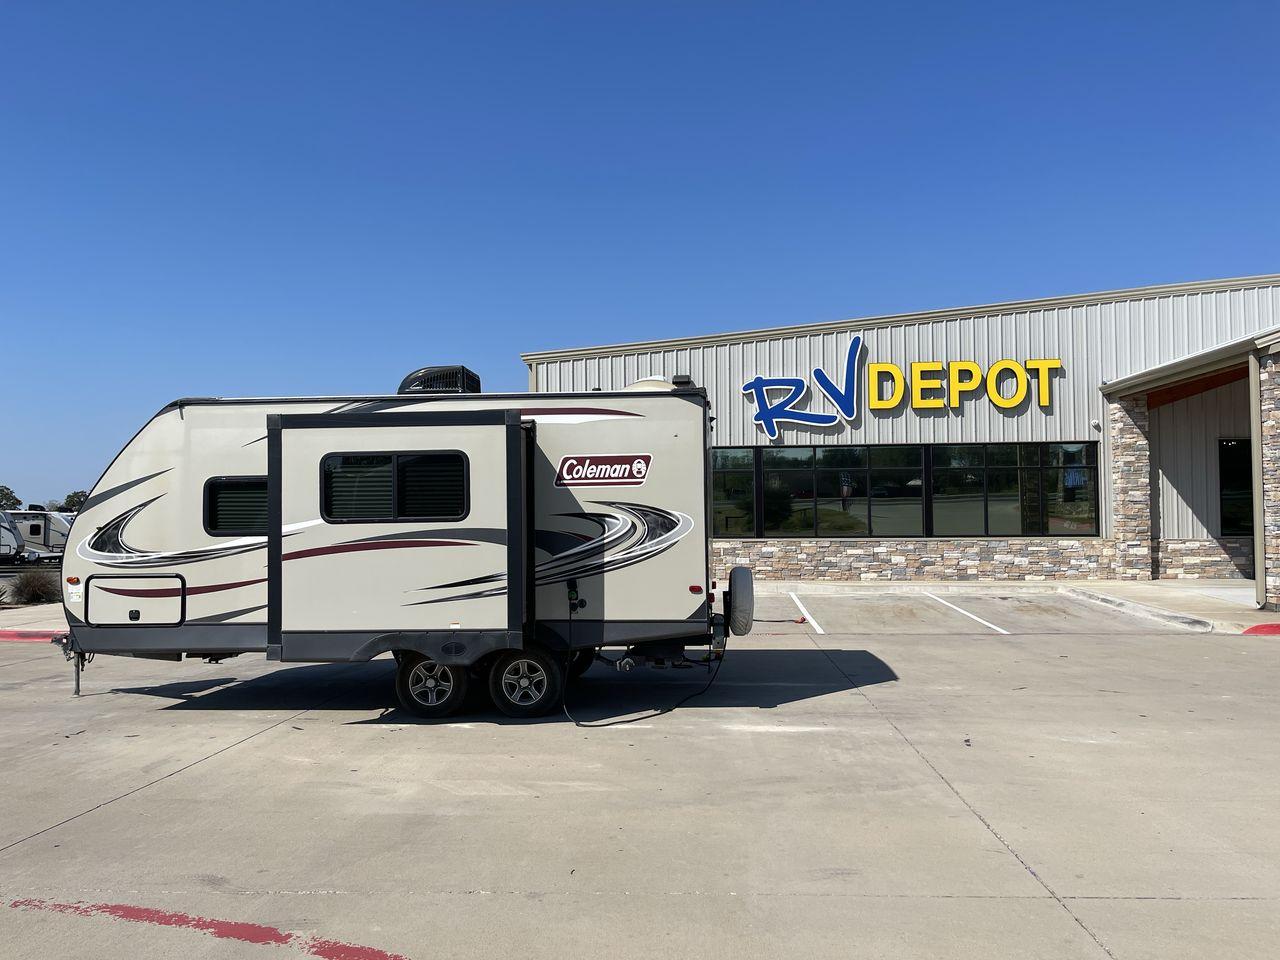 2020 KEYSTONE COLEMAN 1805RB (4YDT18029LM) , Length: 22.75 ft | Dry Weight: 4,448 lbs. | Slides: 1 transmission, located at 4319 N Main St, Cleburne, TX, 76033, (817) 678-5133, 32.385960, -97.391212 - The 2020 Dutchmen Coleman 1805RB is a compact and lightweight travel trailer perfect for adventurers who value versatility and comfort during their travels. This trailer is ideal for both weekend getaways and extended trips, thanks to its manageable length of 22.75 feet and lightweight dry weight of - Photo #21